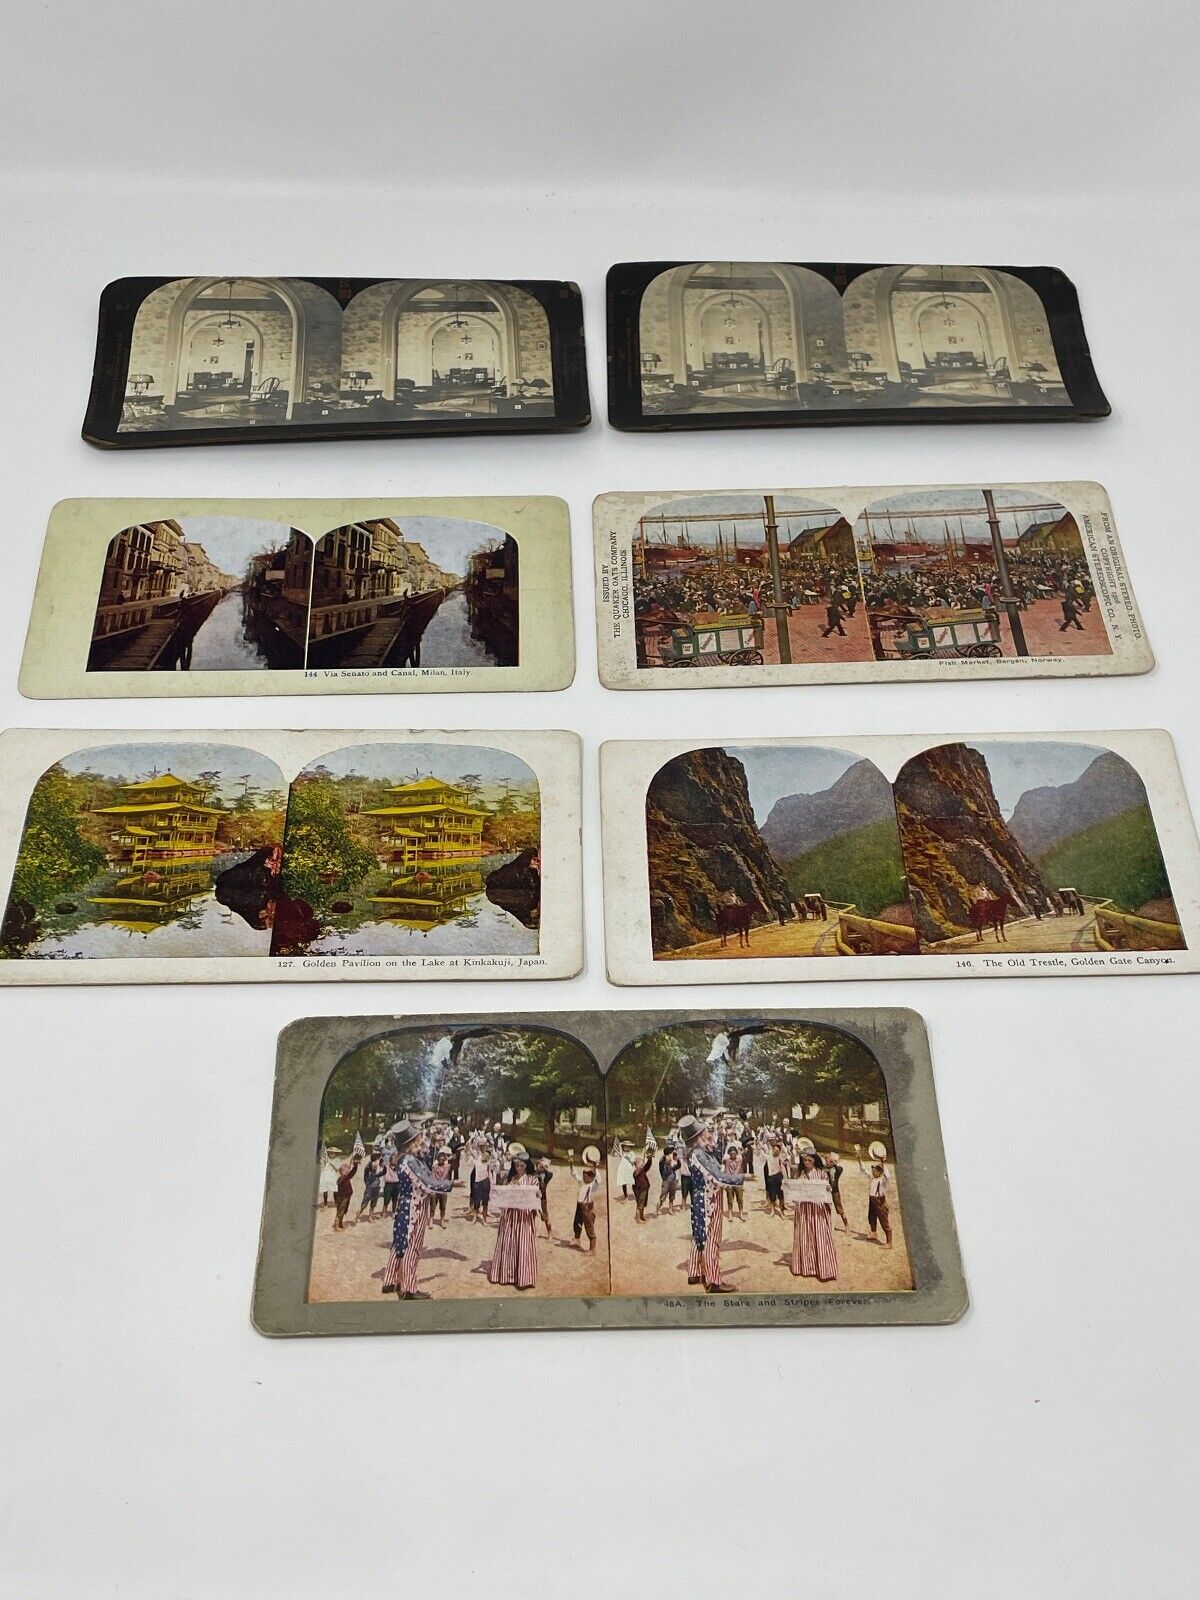 Quaker Oats American Stereoscopic Stereo Photo 7 World Cards